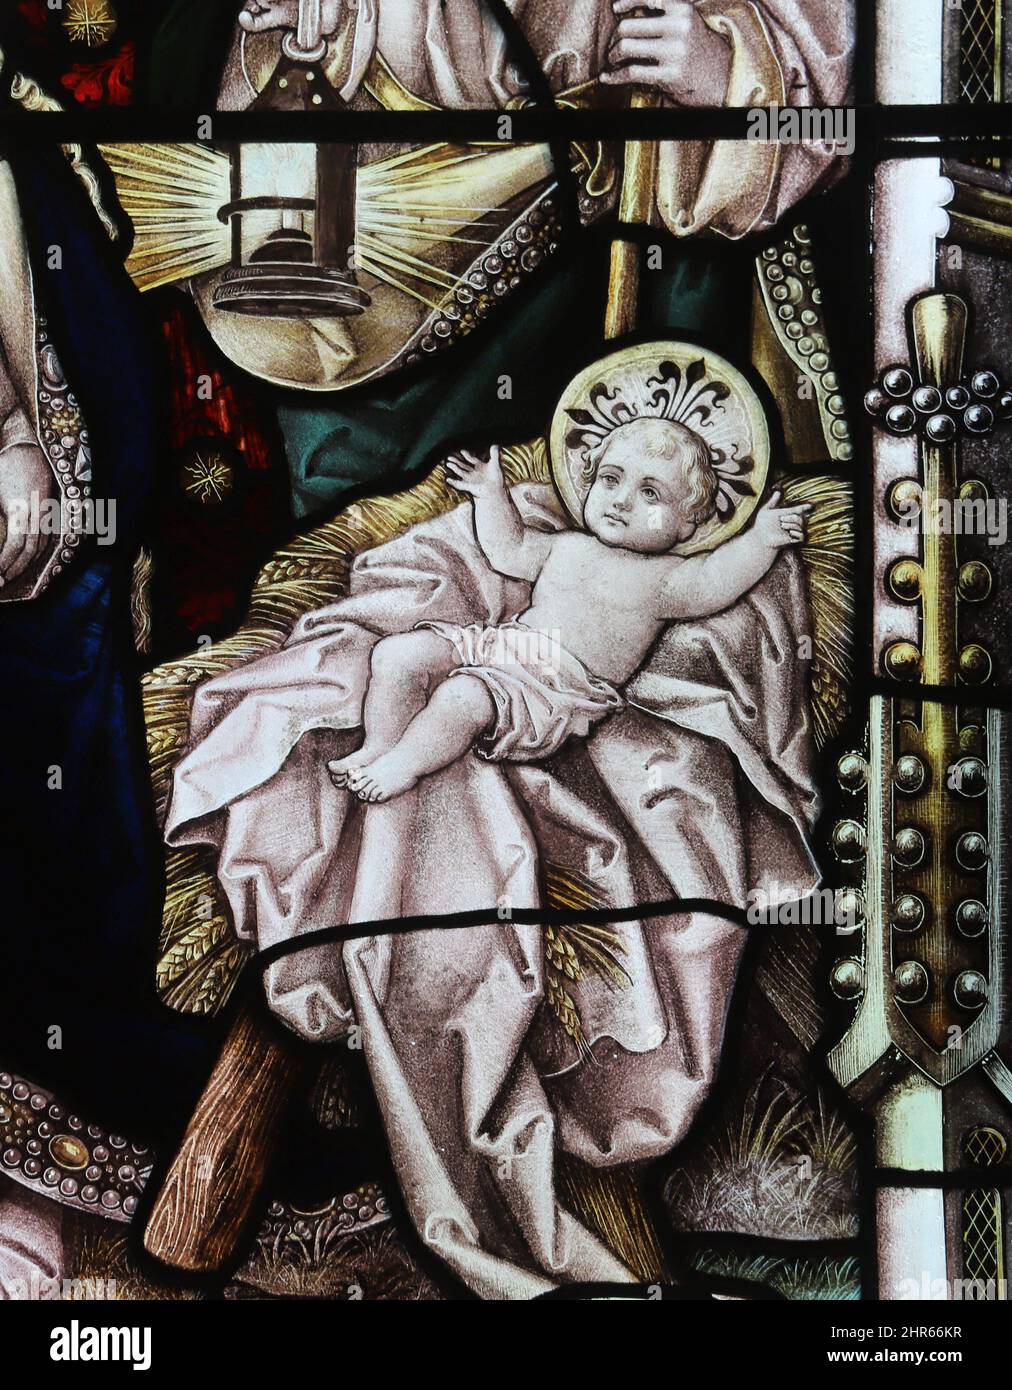 Stained glass window by Percy Bacon & Brothers depicting the Infant Jesus in the manger, designed by Ernest Geldart, St Mary's Church, Coddenham, Suff Stock Photo